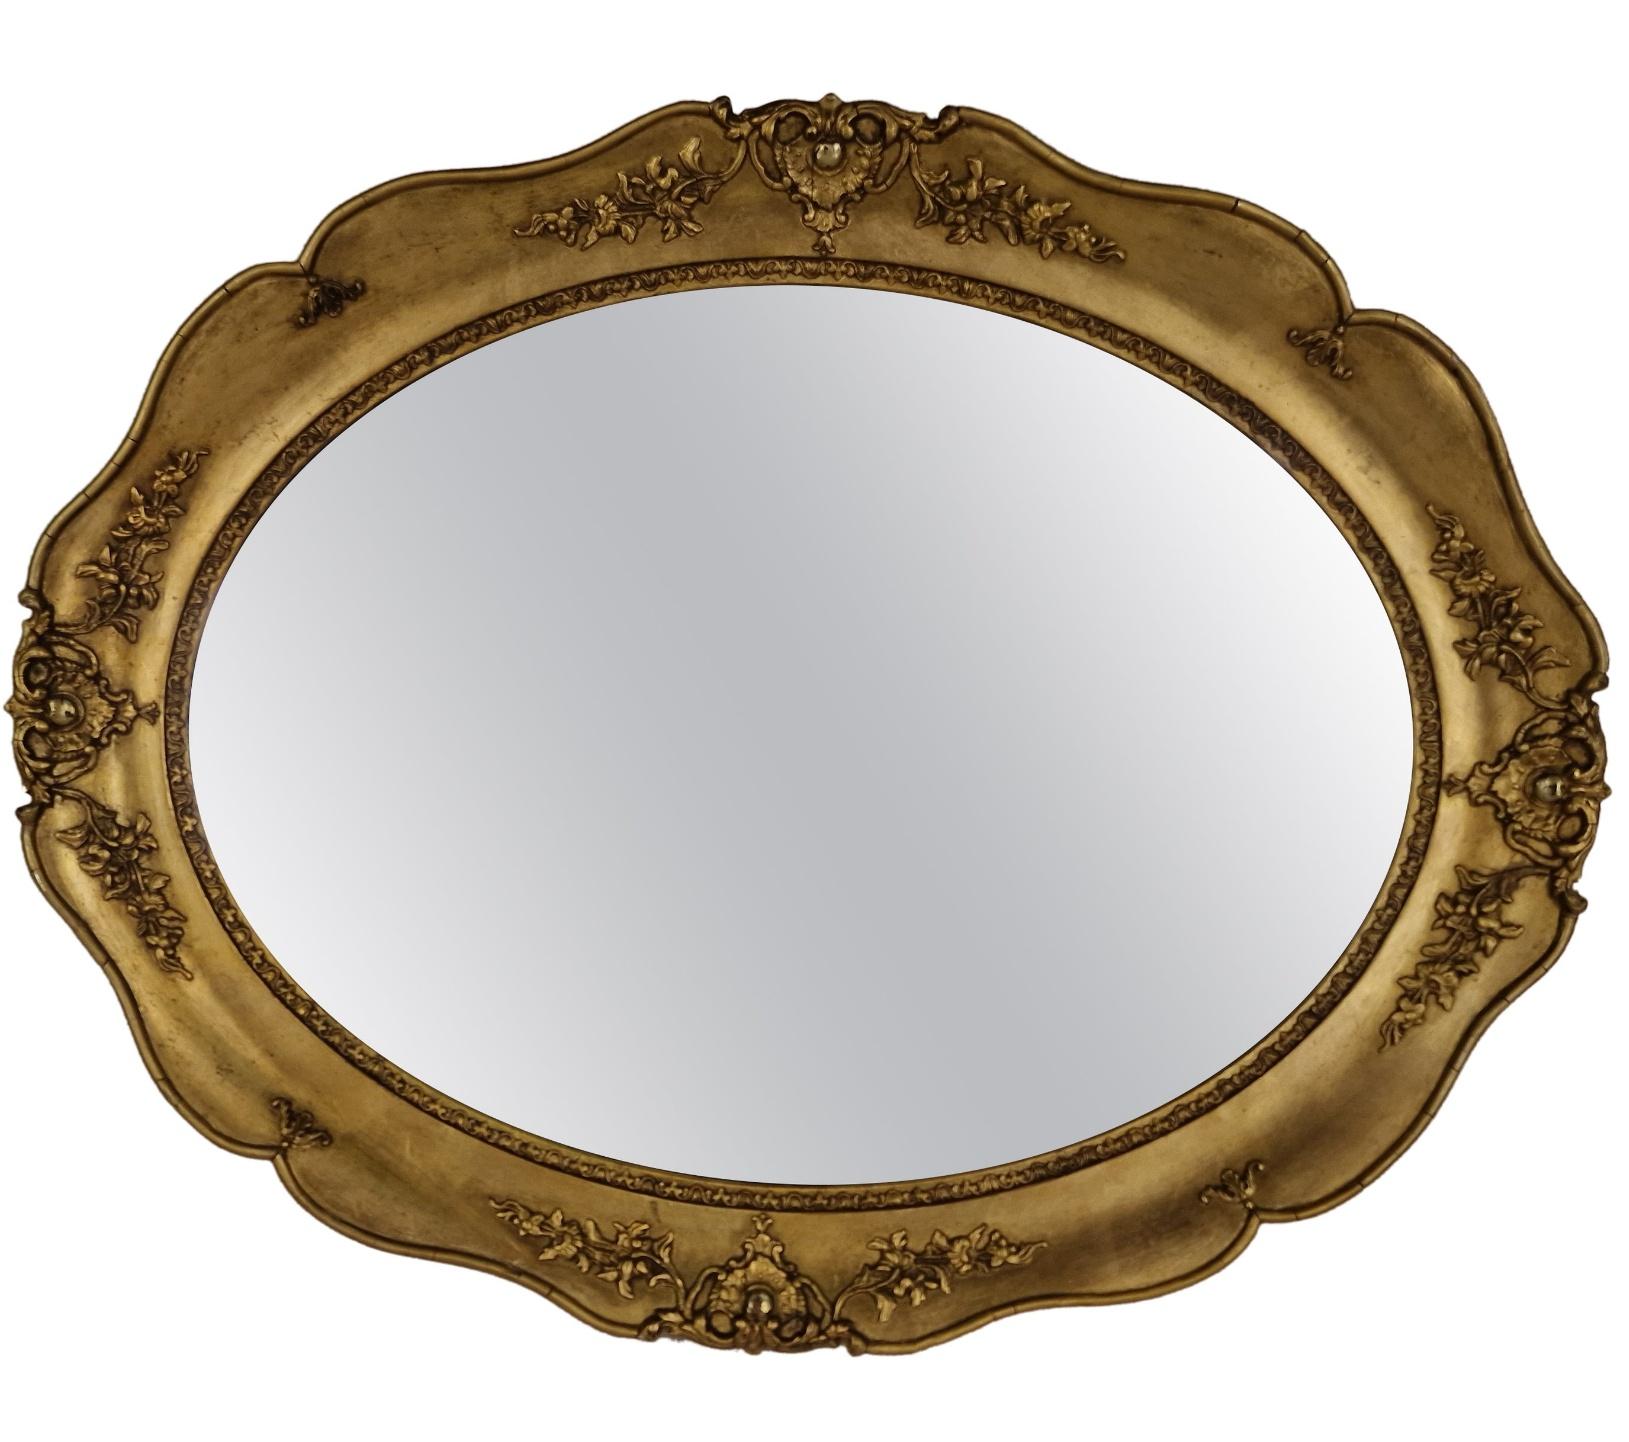 Wonderful rare oval wall mirror / frame, in well known classic shape, of the Biedermeier period, made around 1860 in Austria, Europe. 
The special stucco work all around the frame in a floral design make this object an extraordinary piece.
This